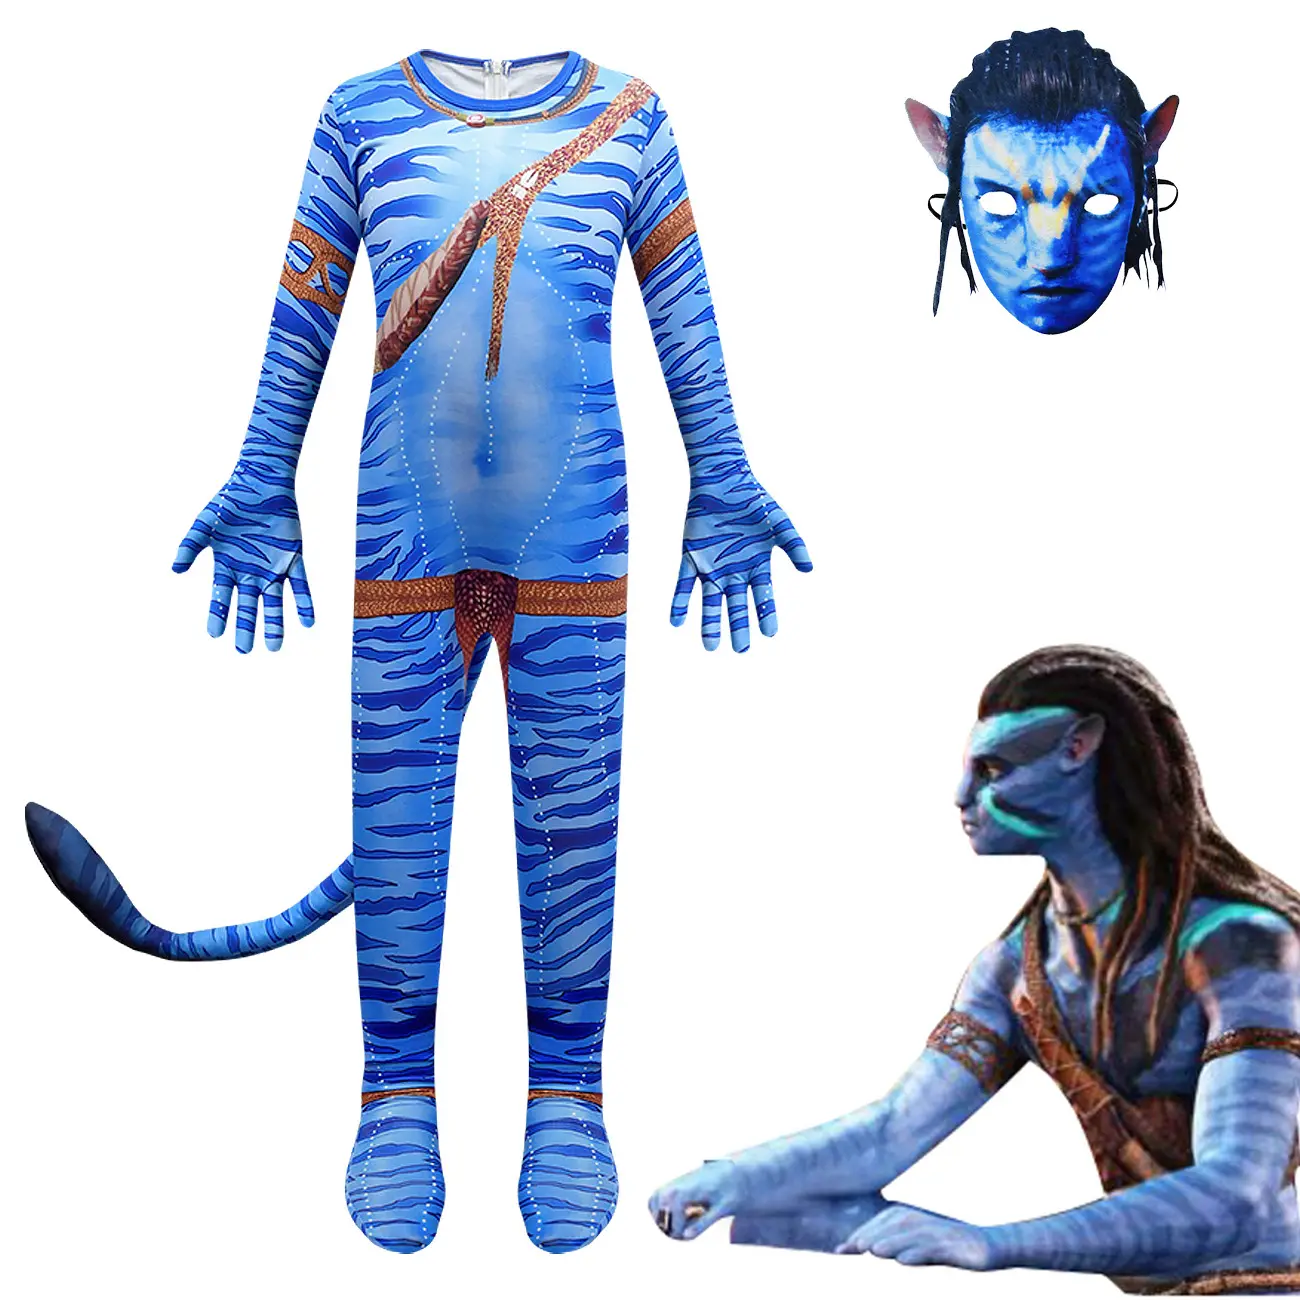 Avatar 2 Costume for Kids Adults with Accessory, The Way of Water Outfit Bodysuit with Tail Boys Girls Man Women for Festival